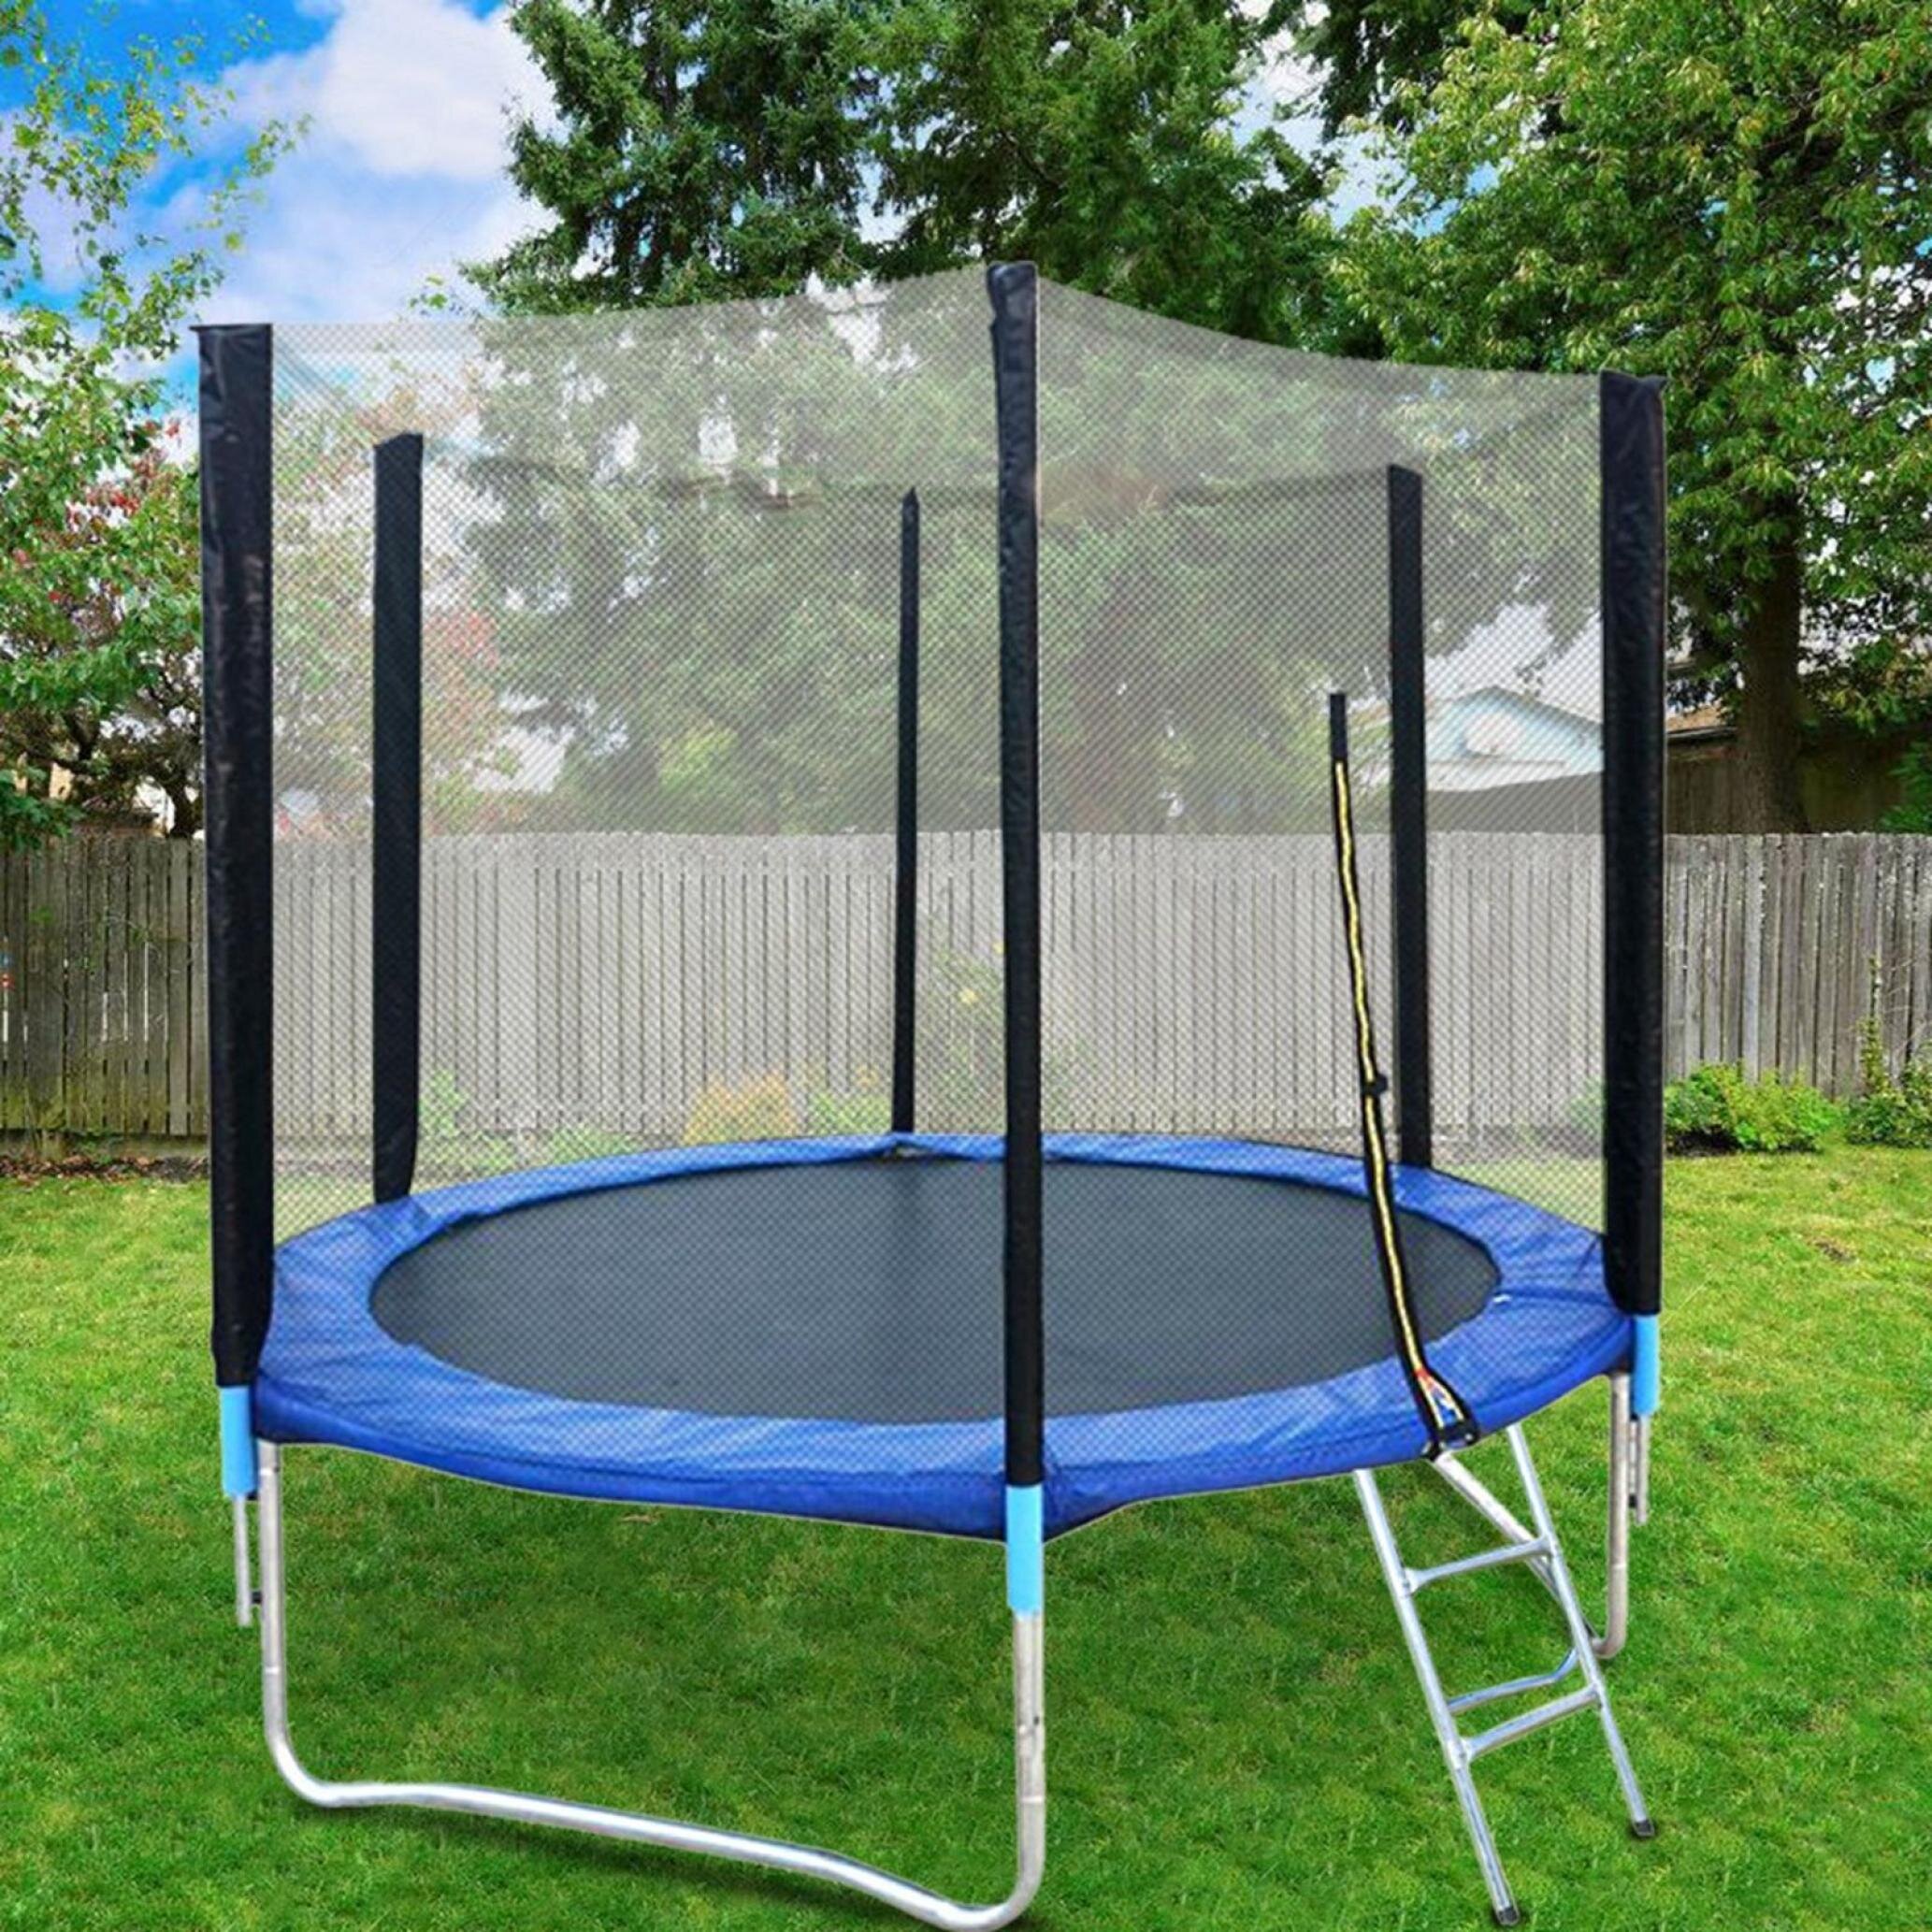 Details about   12 FT Trampoline Jumping Mat Kids Adults with Enclosure Net Indoor Outdoor Yard 